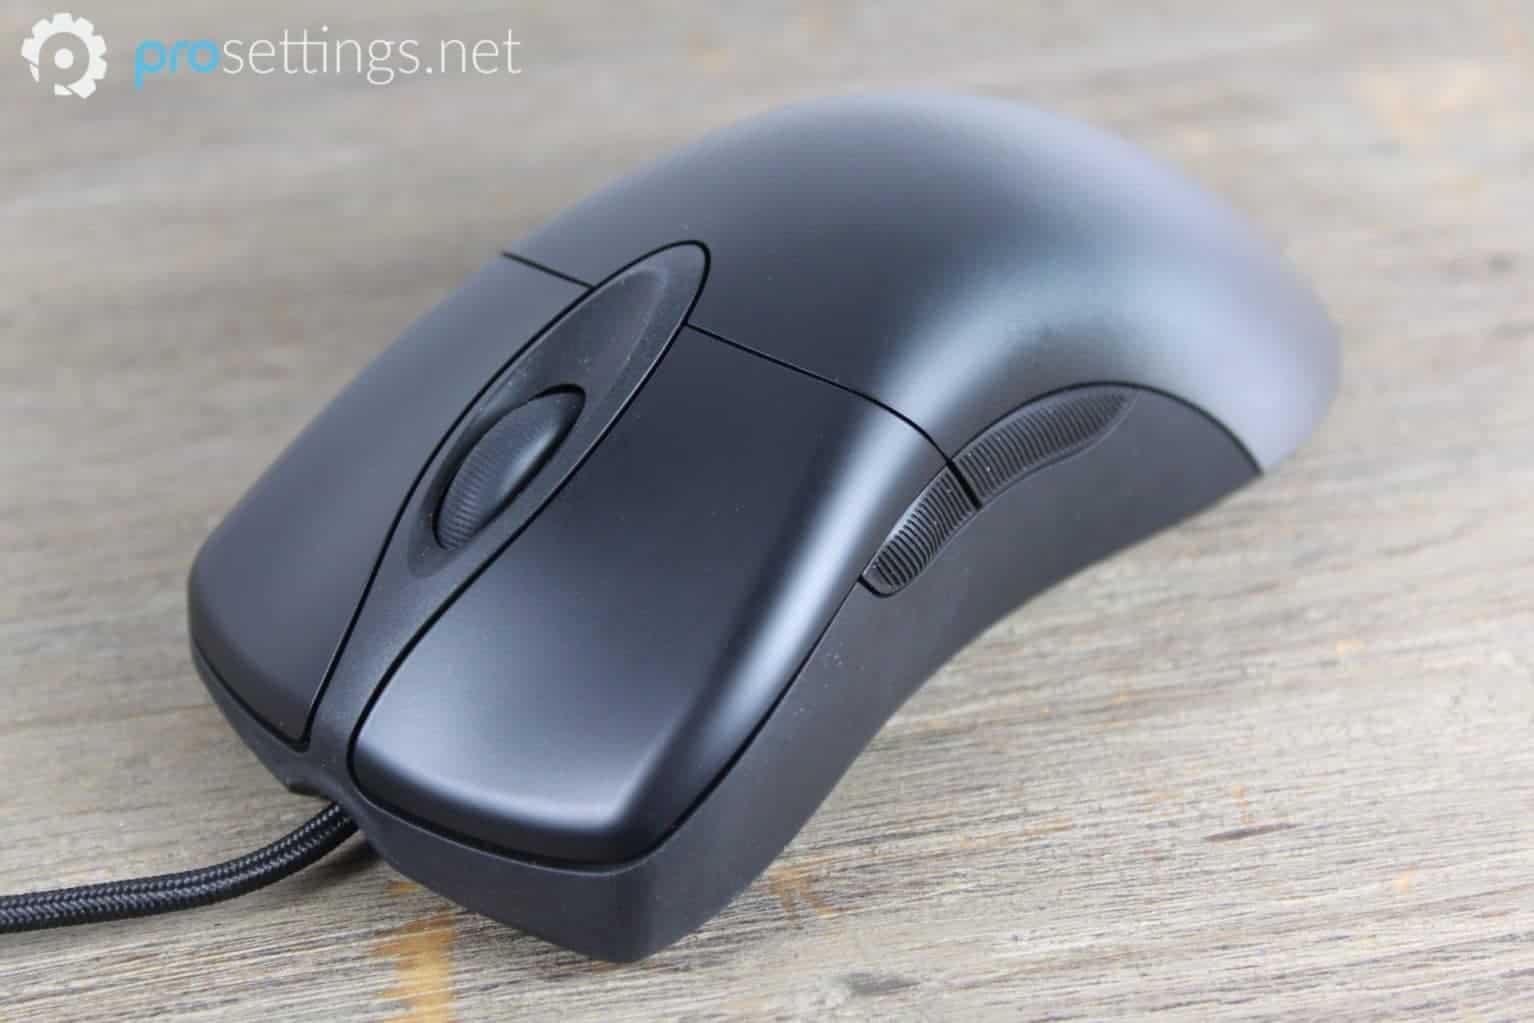 Microsoft Intellimouse Pro Review Buttons and Scroll